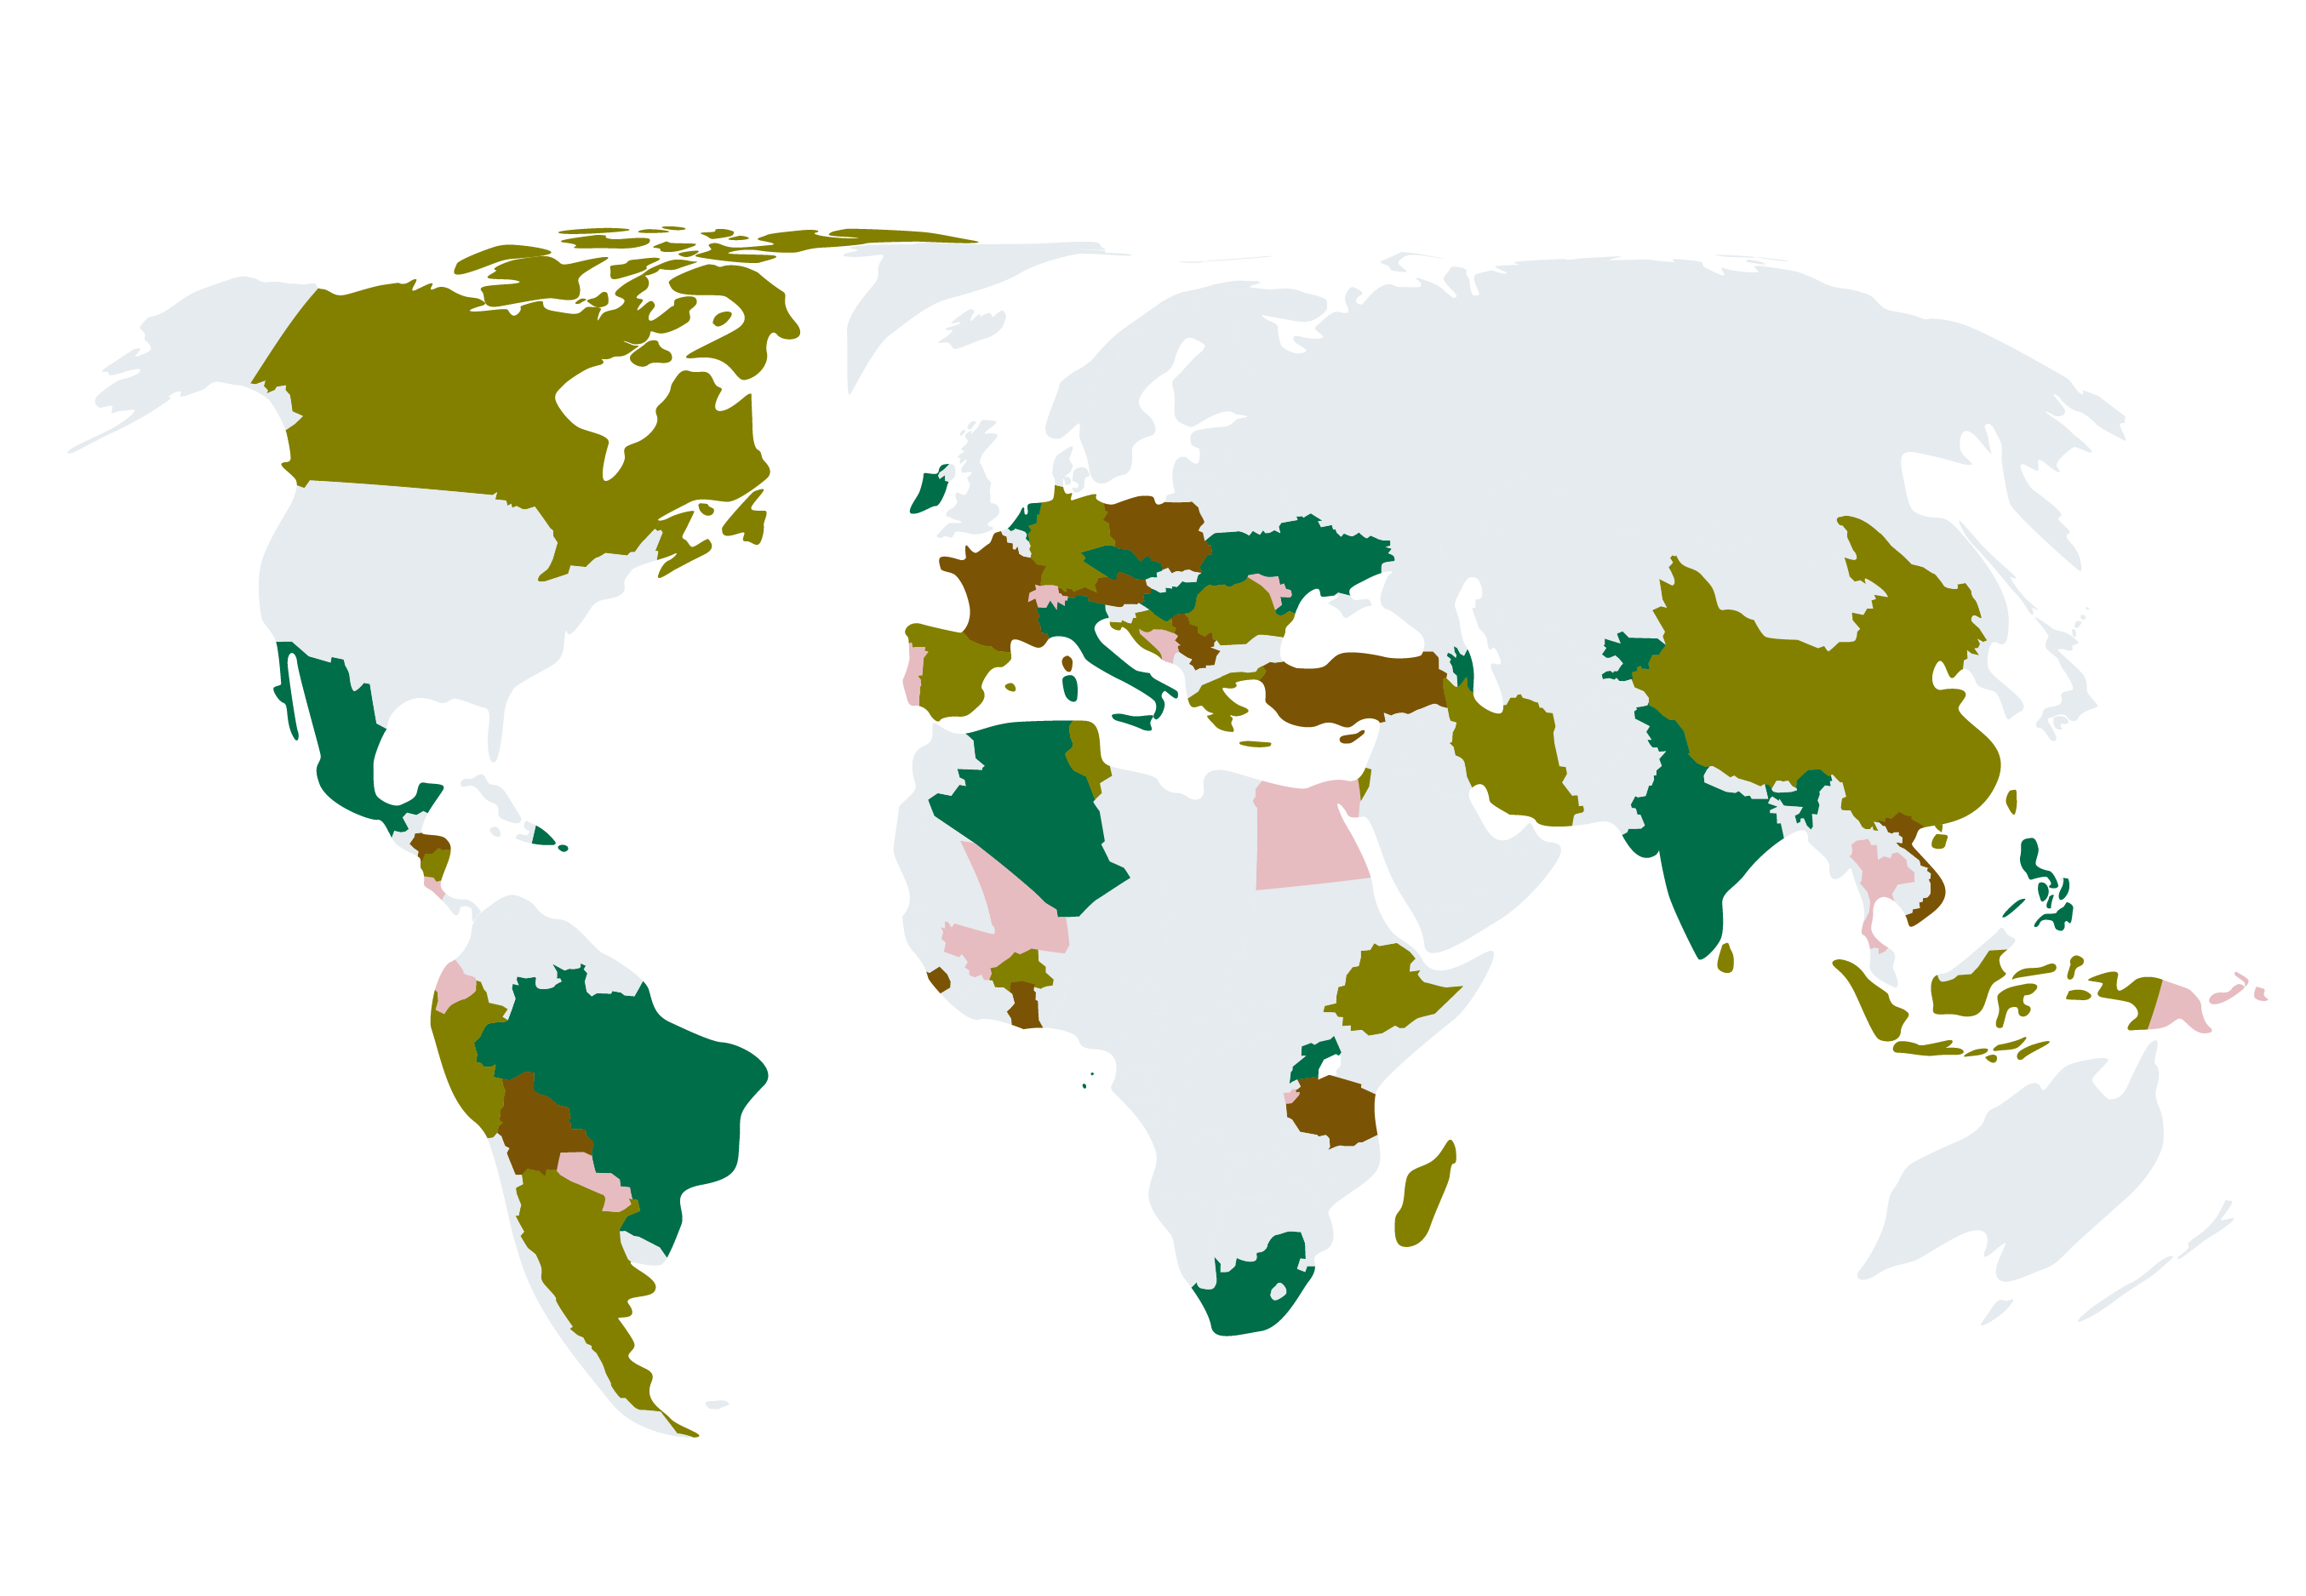 Naturland certifies in these countries